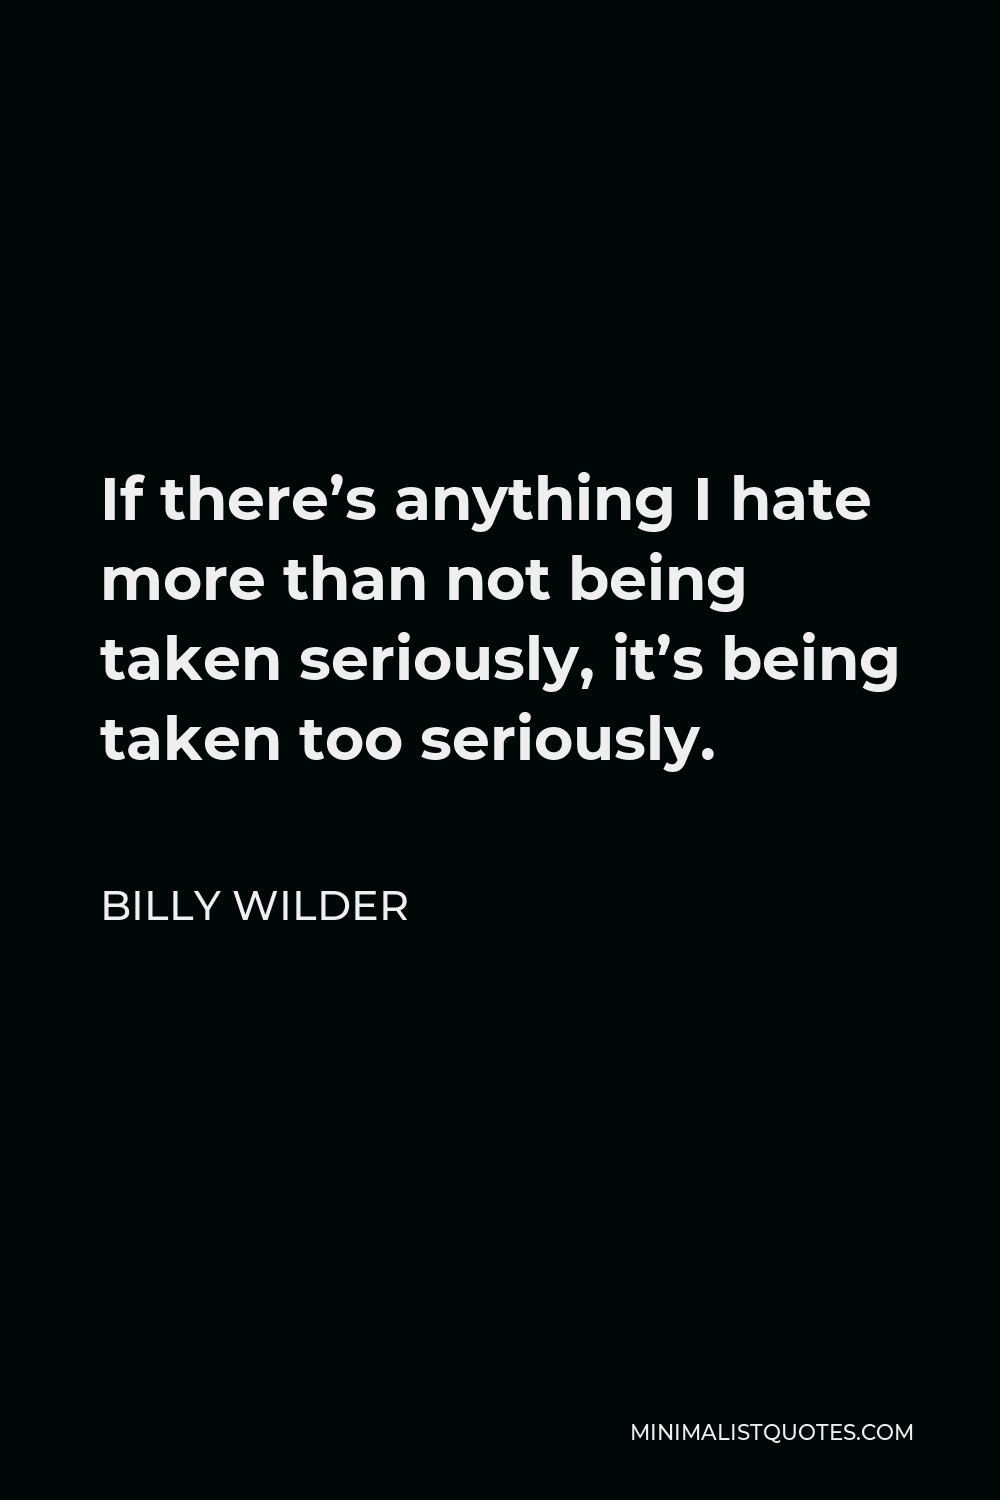 Billy Wilder Quote - If there’s anything I hate more than not being taken seriously, it’s being taken too seriously.